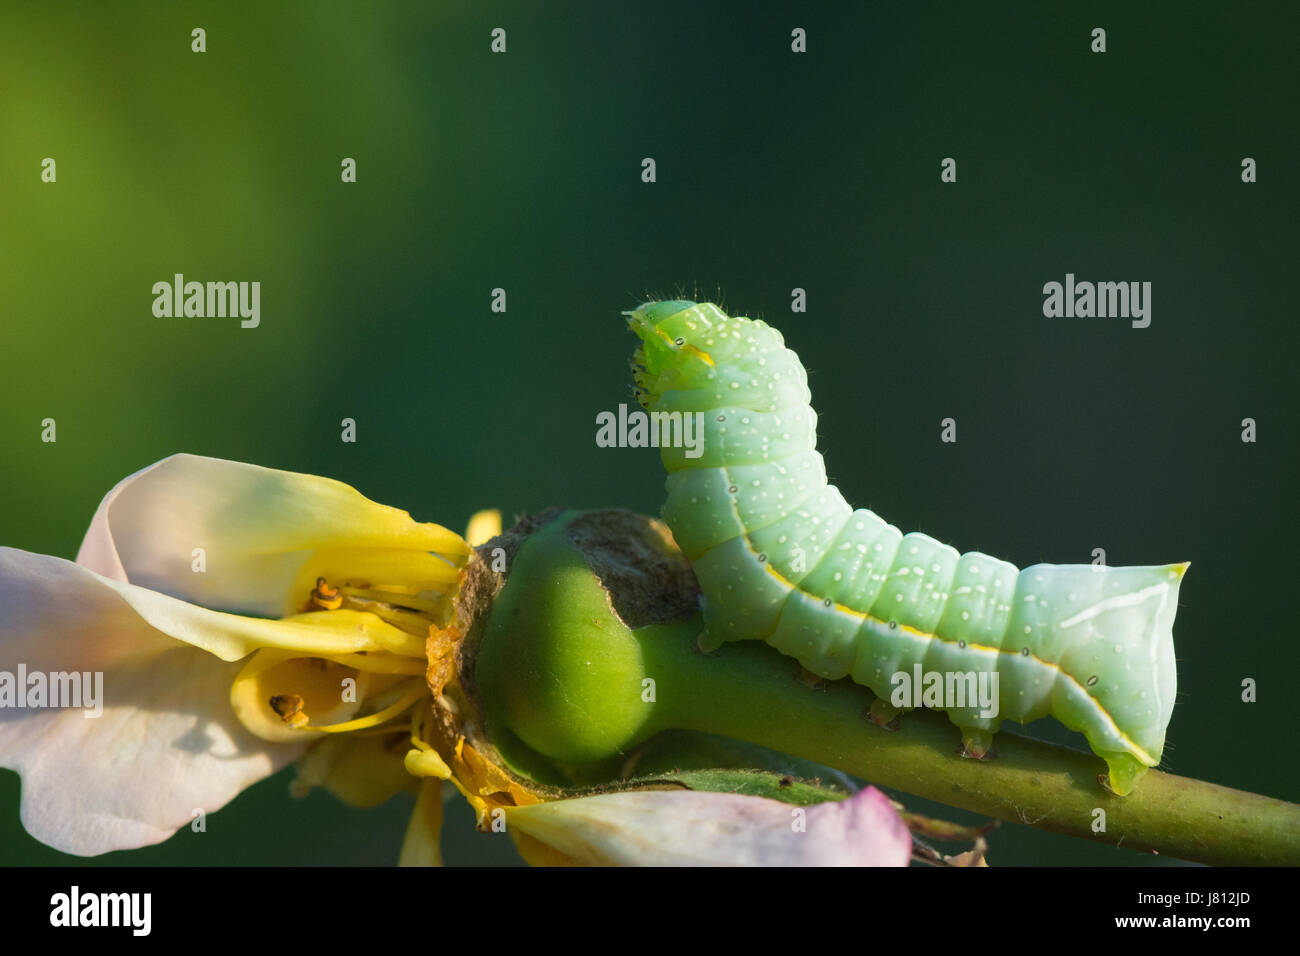 Caterpillar of the Copper Underwing moth feeding on a cultivated rose Stock Photo